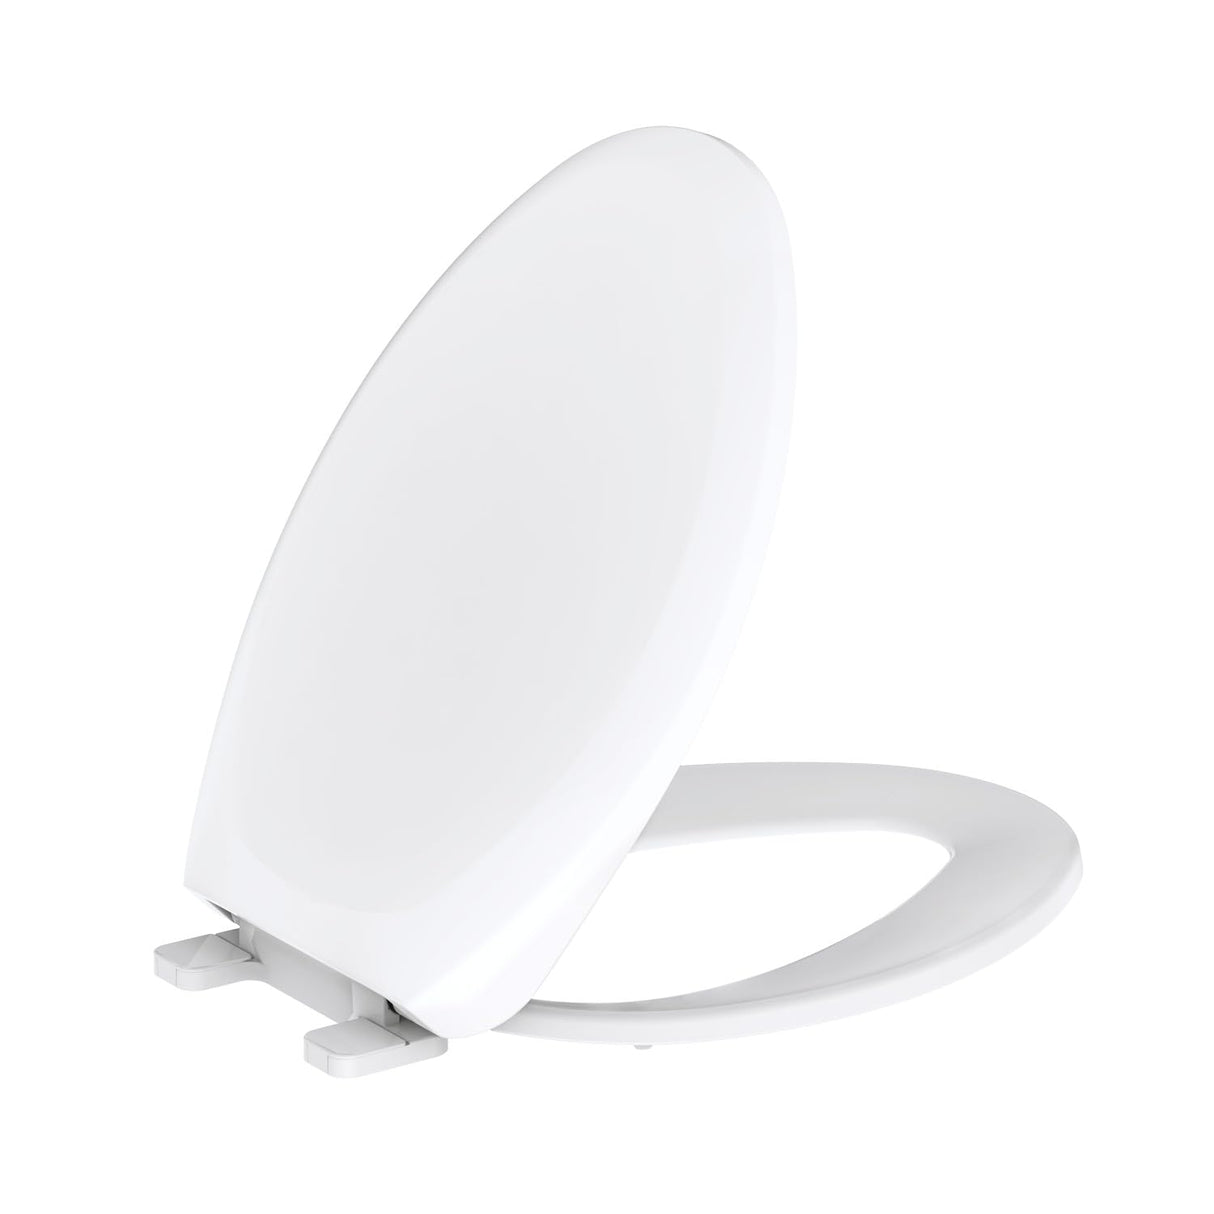 Gerber G0099213 White Adjustable Slow Close Elongated Toilet Seat With Cover